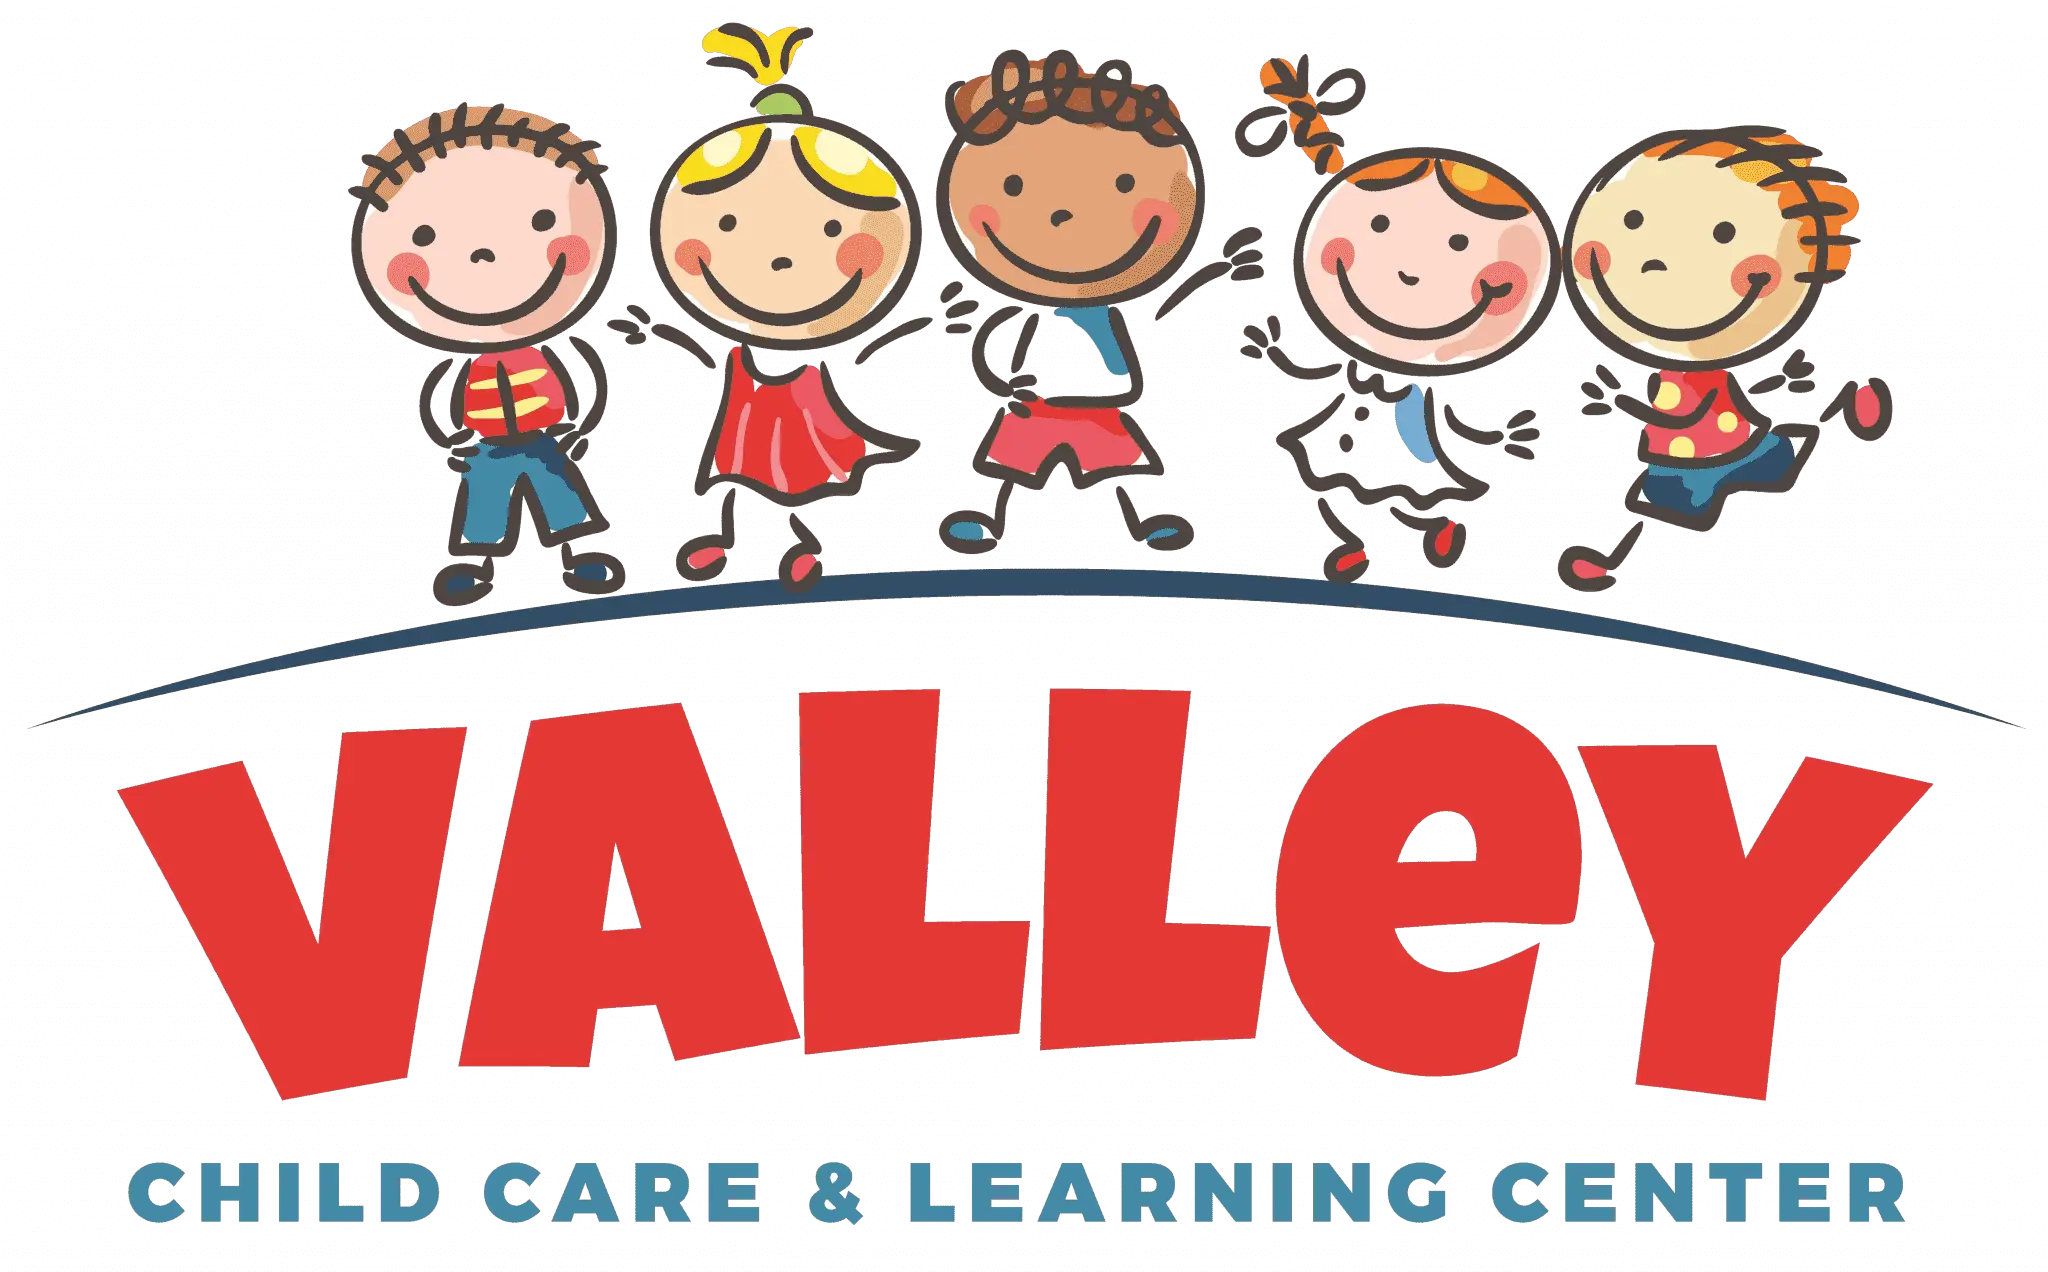 Valley Child Care & Learning Center